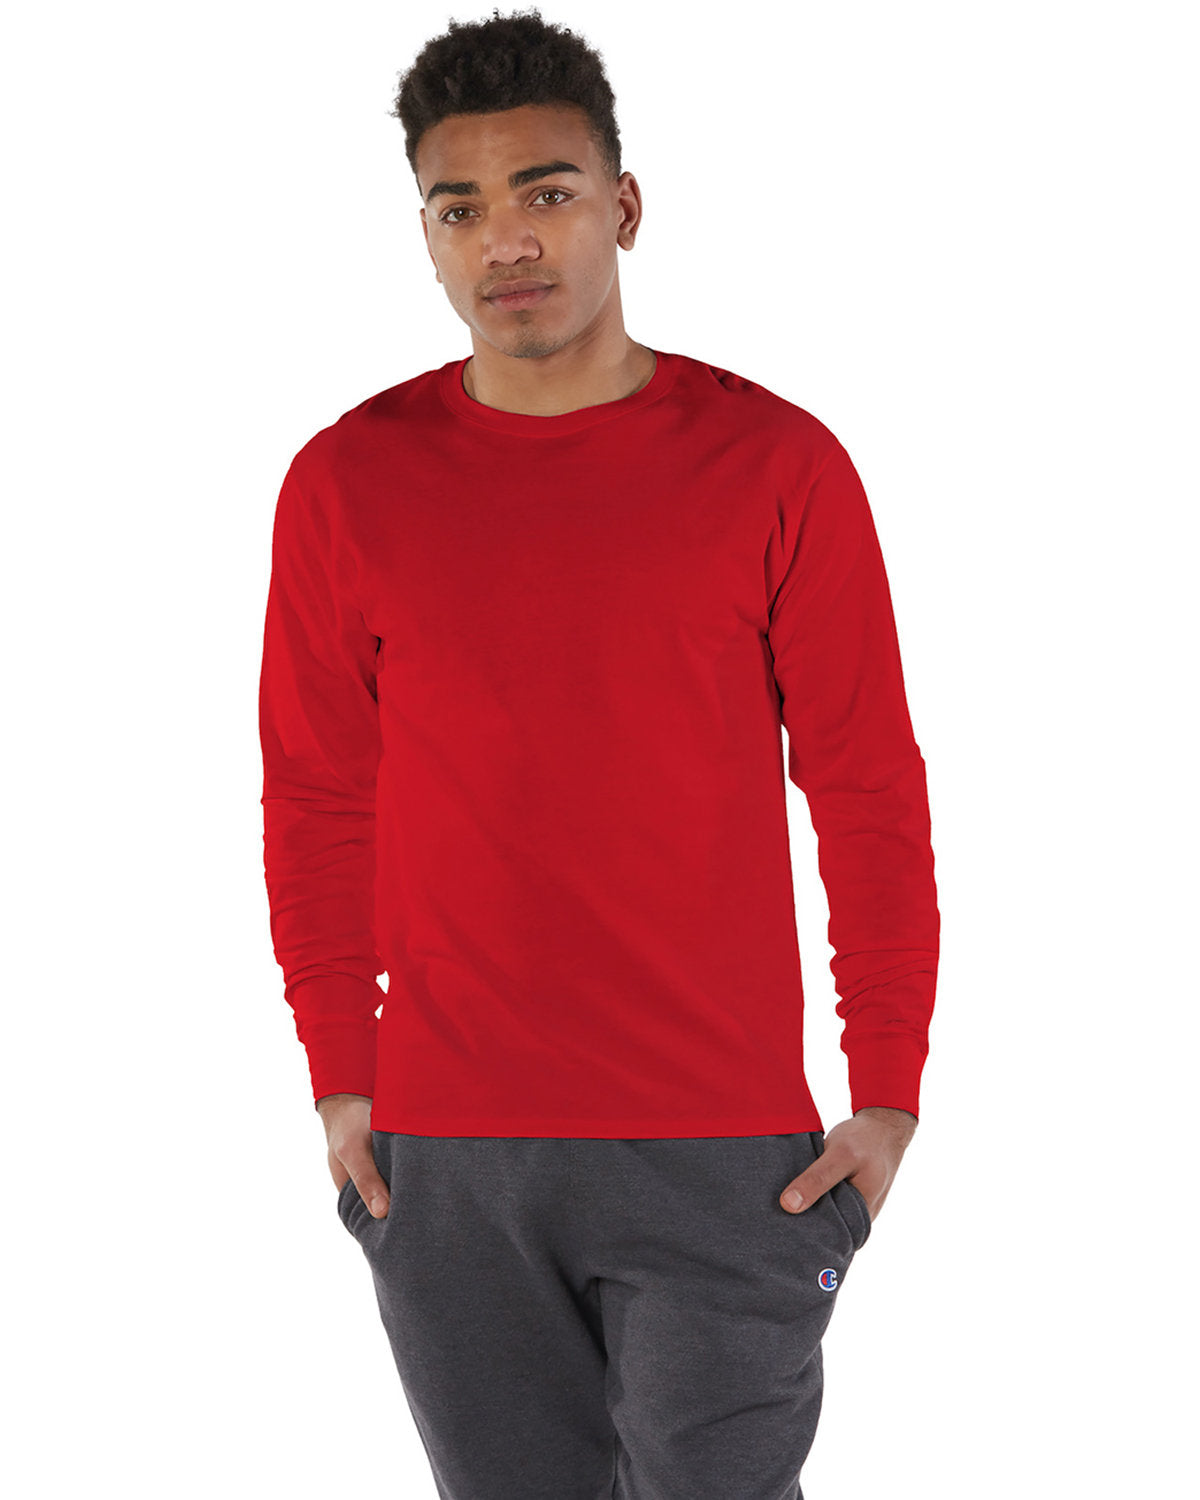 CP15-Champion-ATHLETIC RED